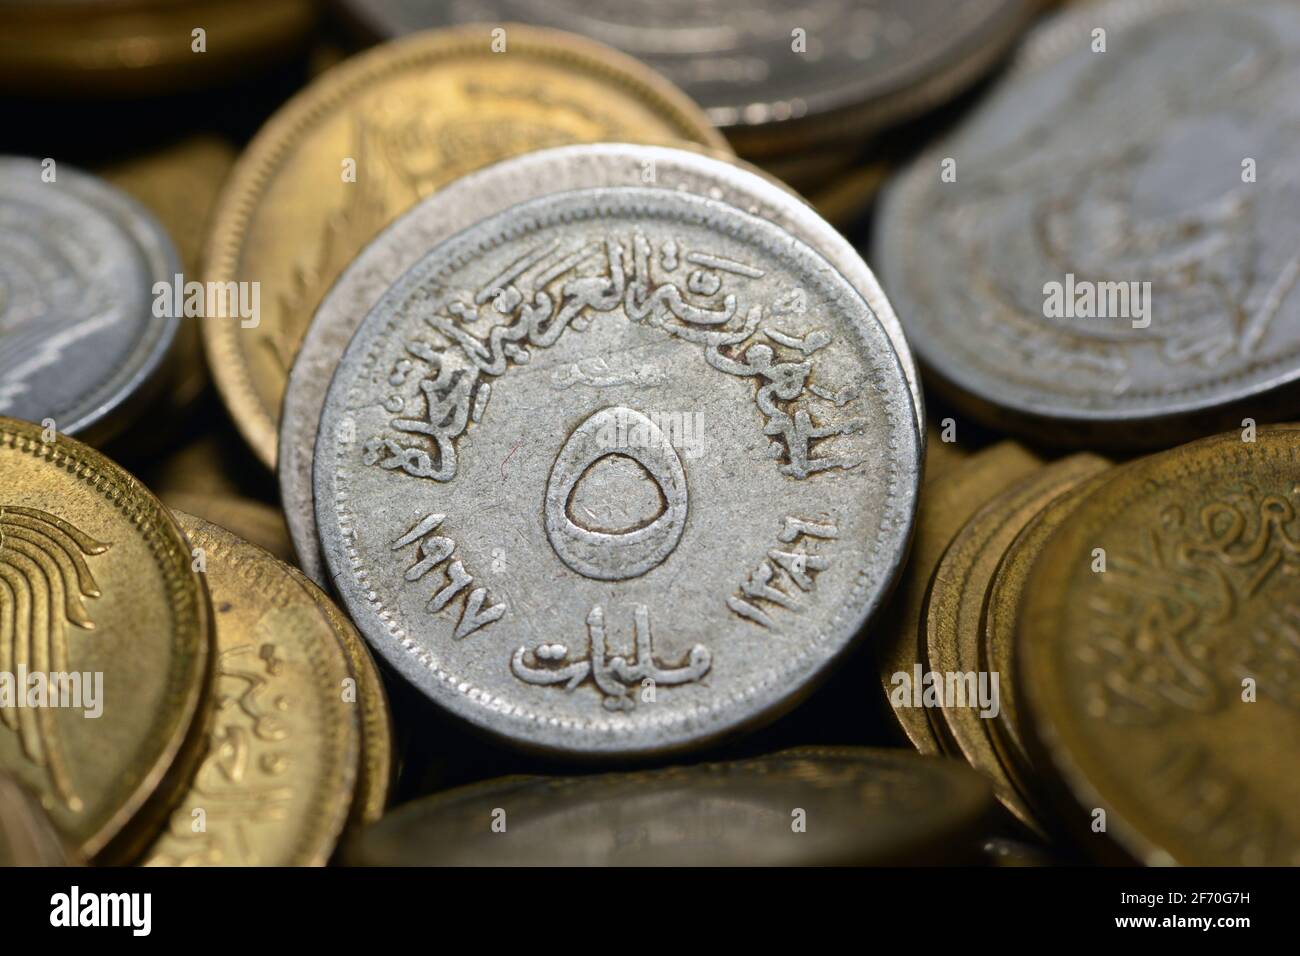 five milliemes coin 1967, old Egyptian money of 5 milliemes coin the currency of the United Arab Republic of Egypt and Syria, Vintage retro Stock Photo